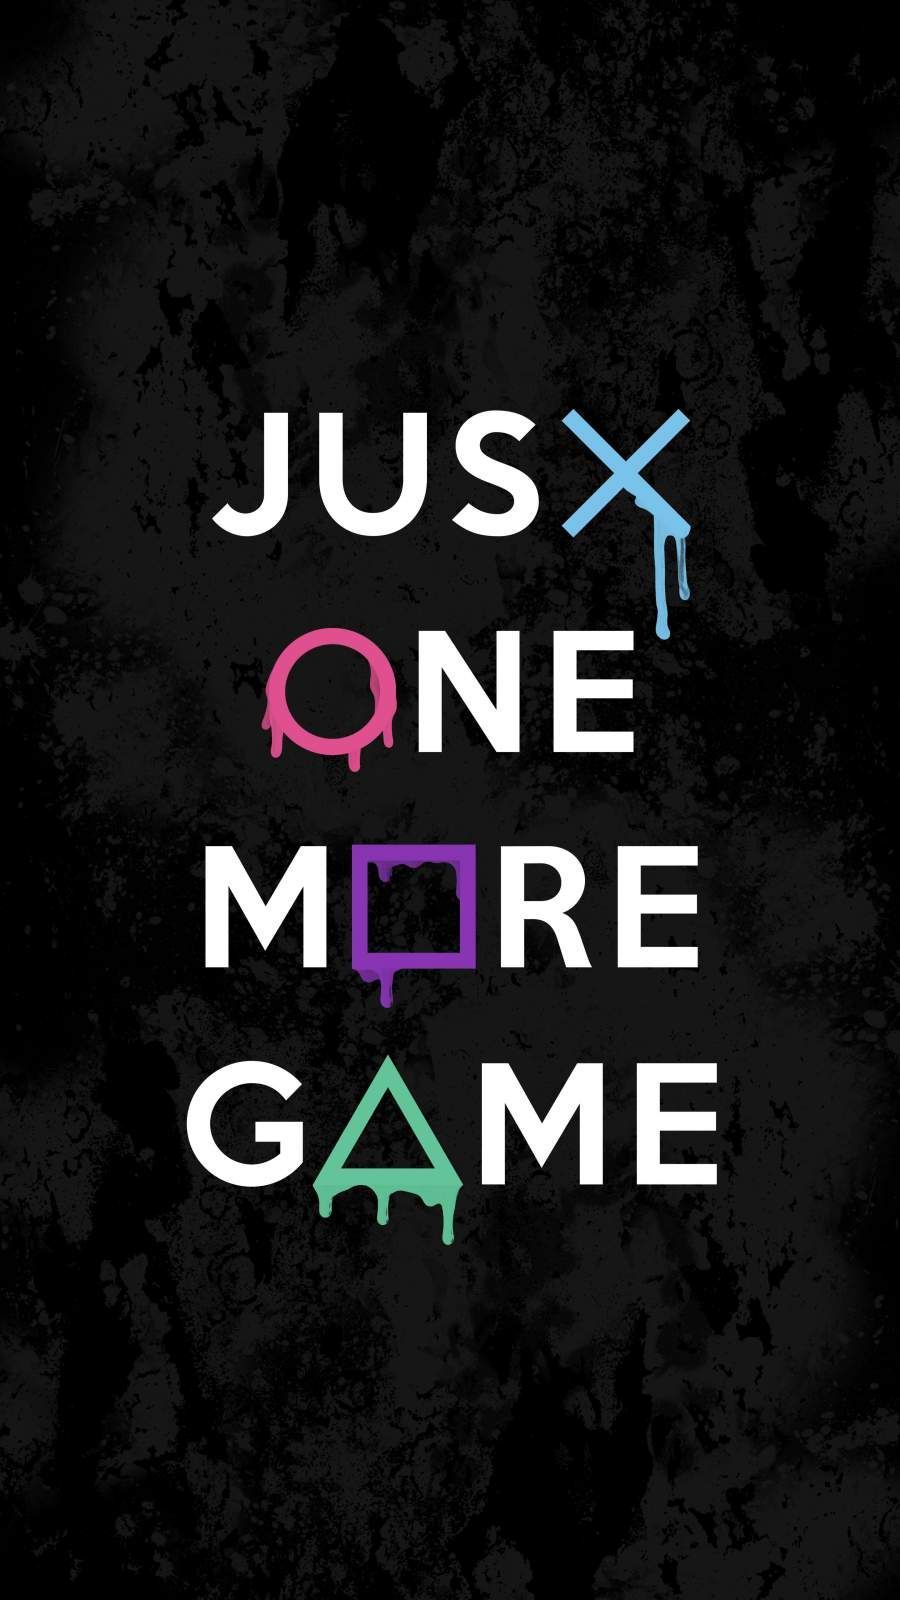 Just One More Game iPhone Wallpaper. Gamer quotes, Game wallpaper iphone, iPhone games